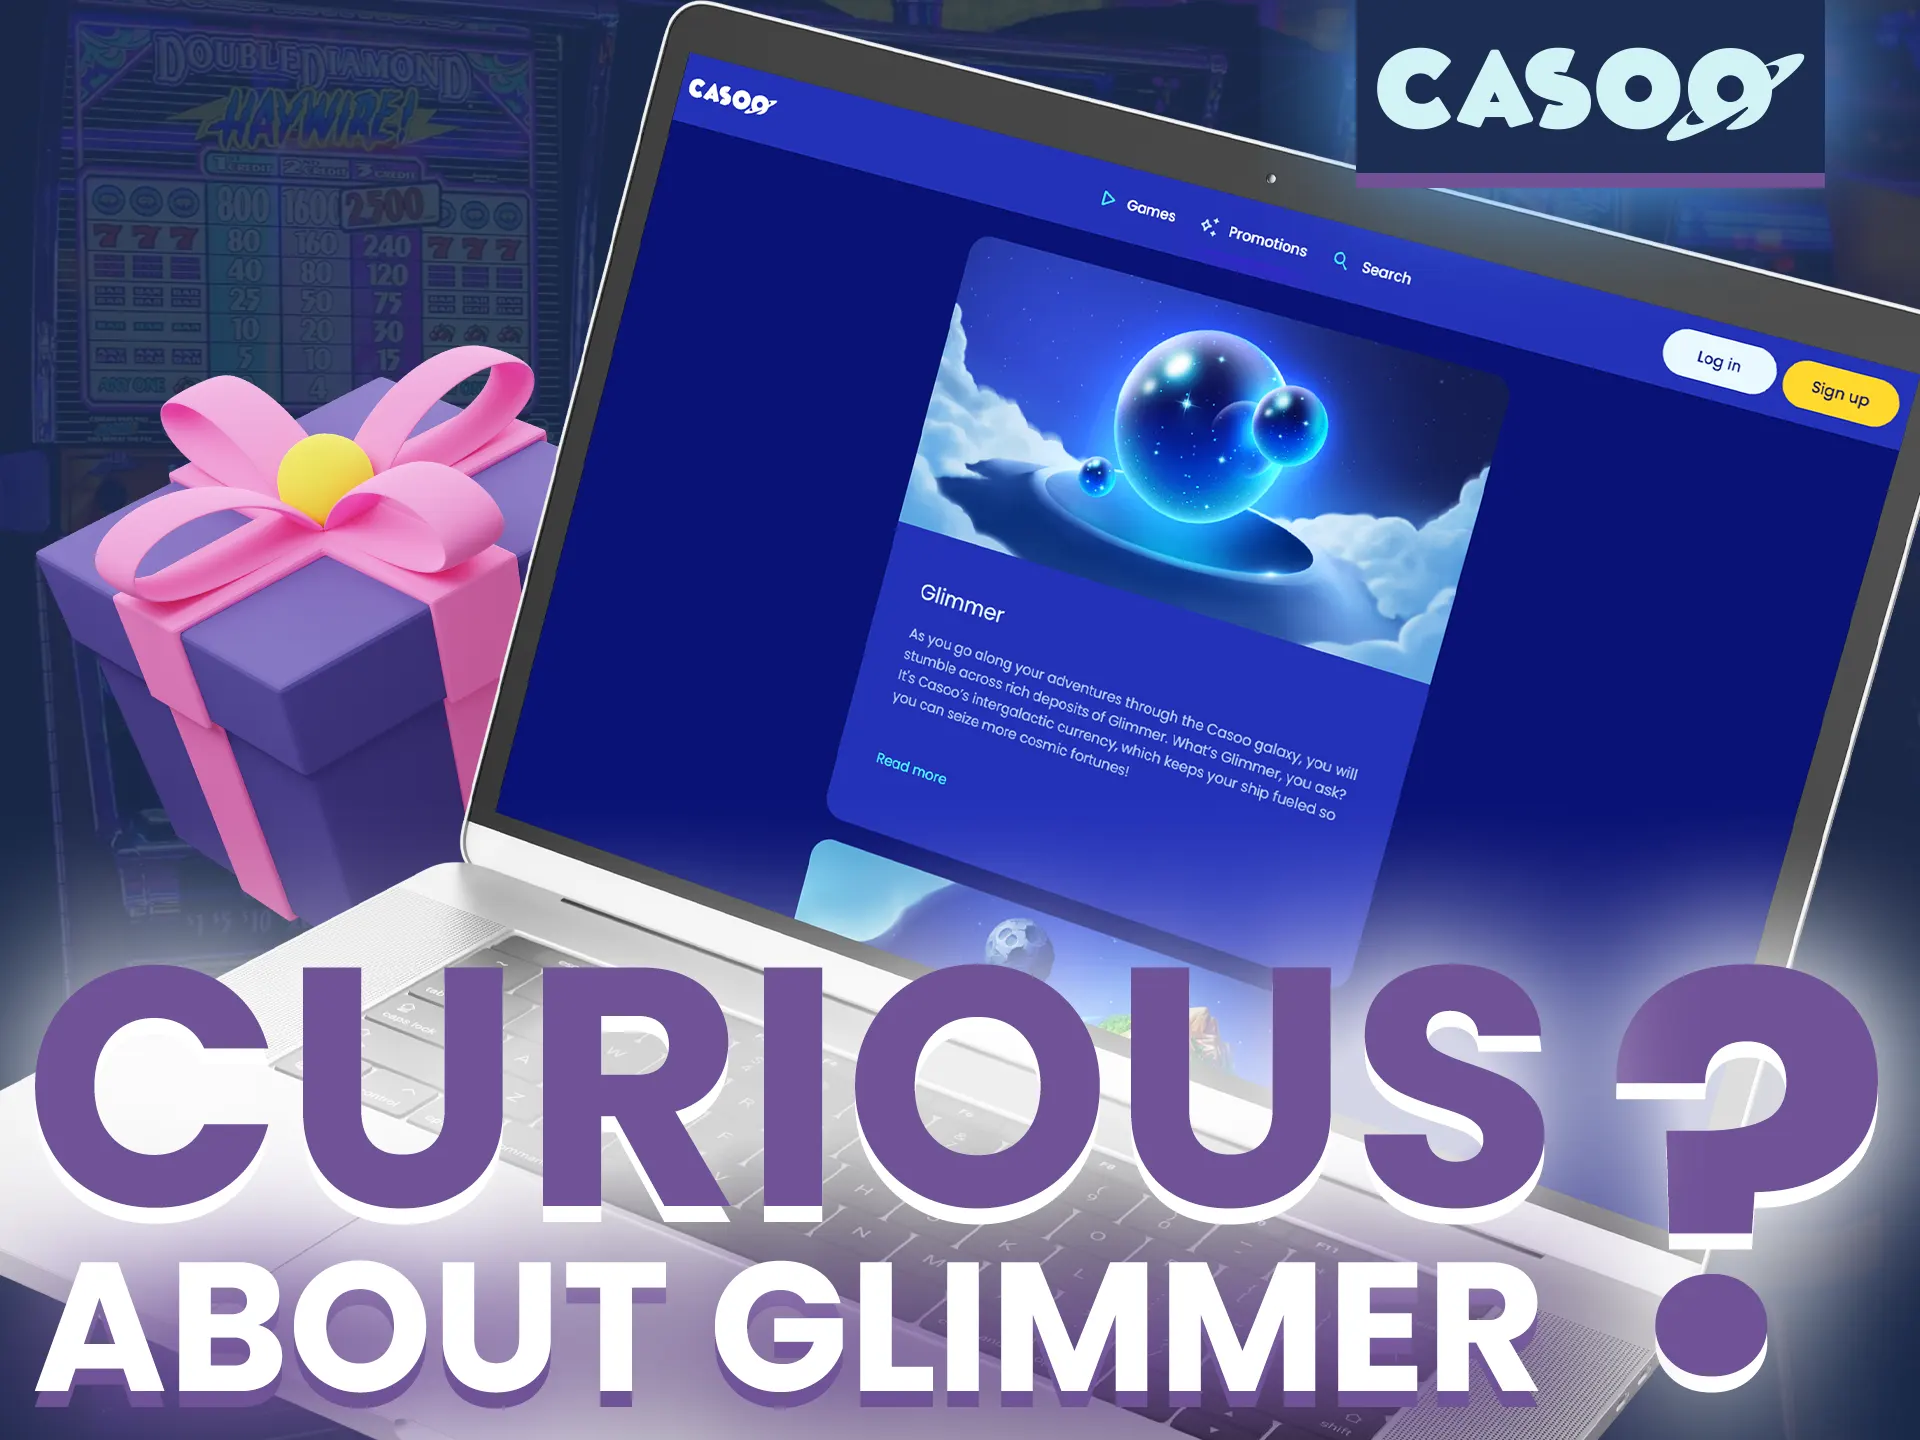 Get Glimmer on your Casoo Casino balance to spend on free bets and cash rewards.